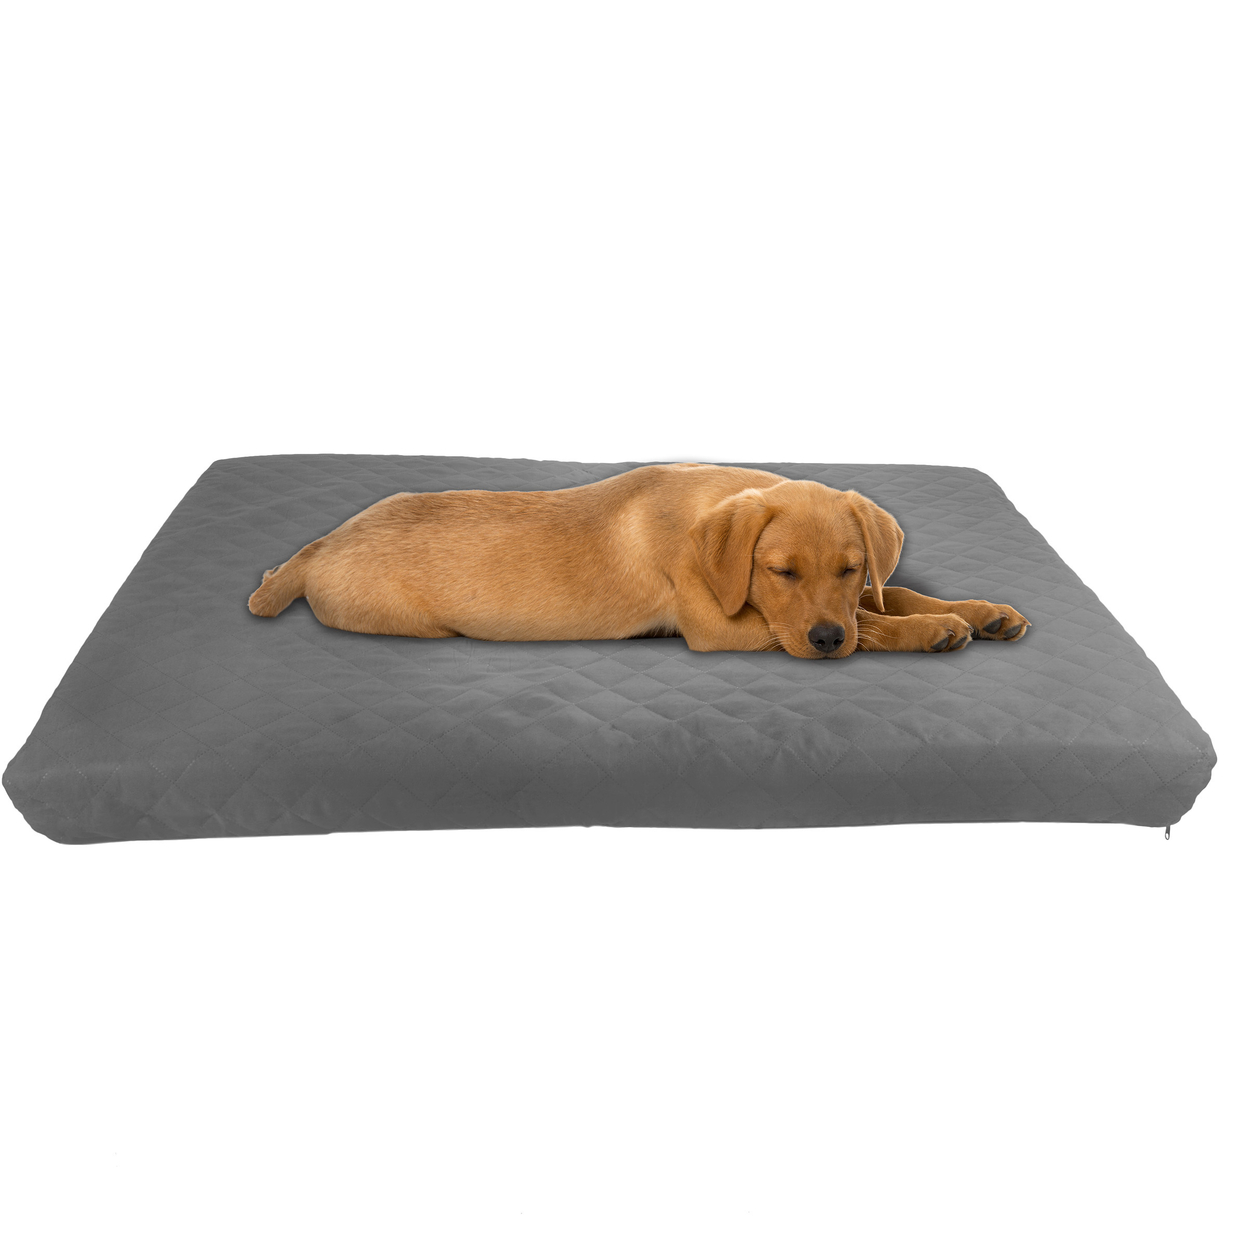 Waterproof Orthopedic Memory Foam Dog Pet Bed Washable Cover Non Slip Bottom - 36x27 Inches